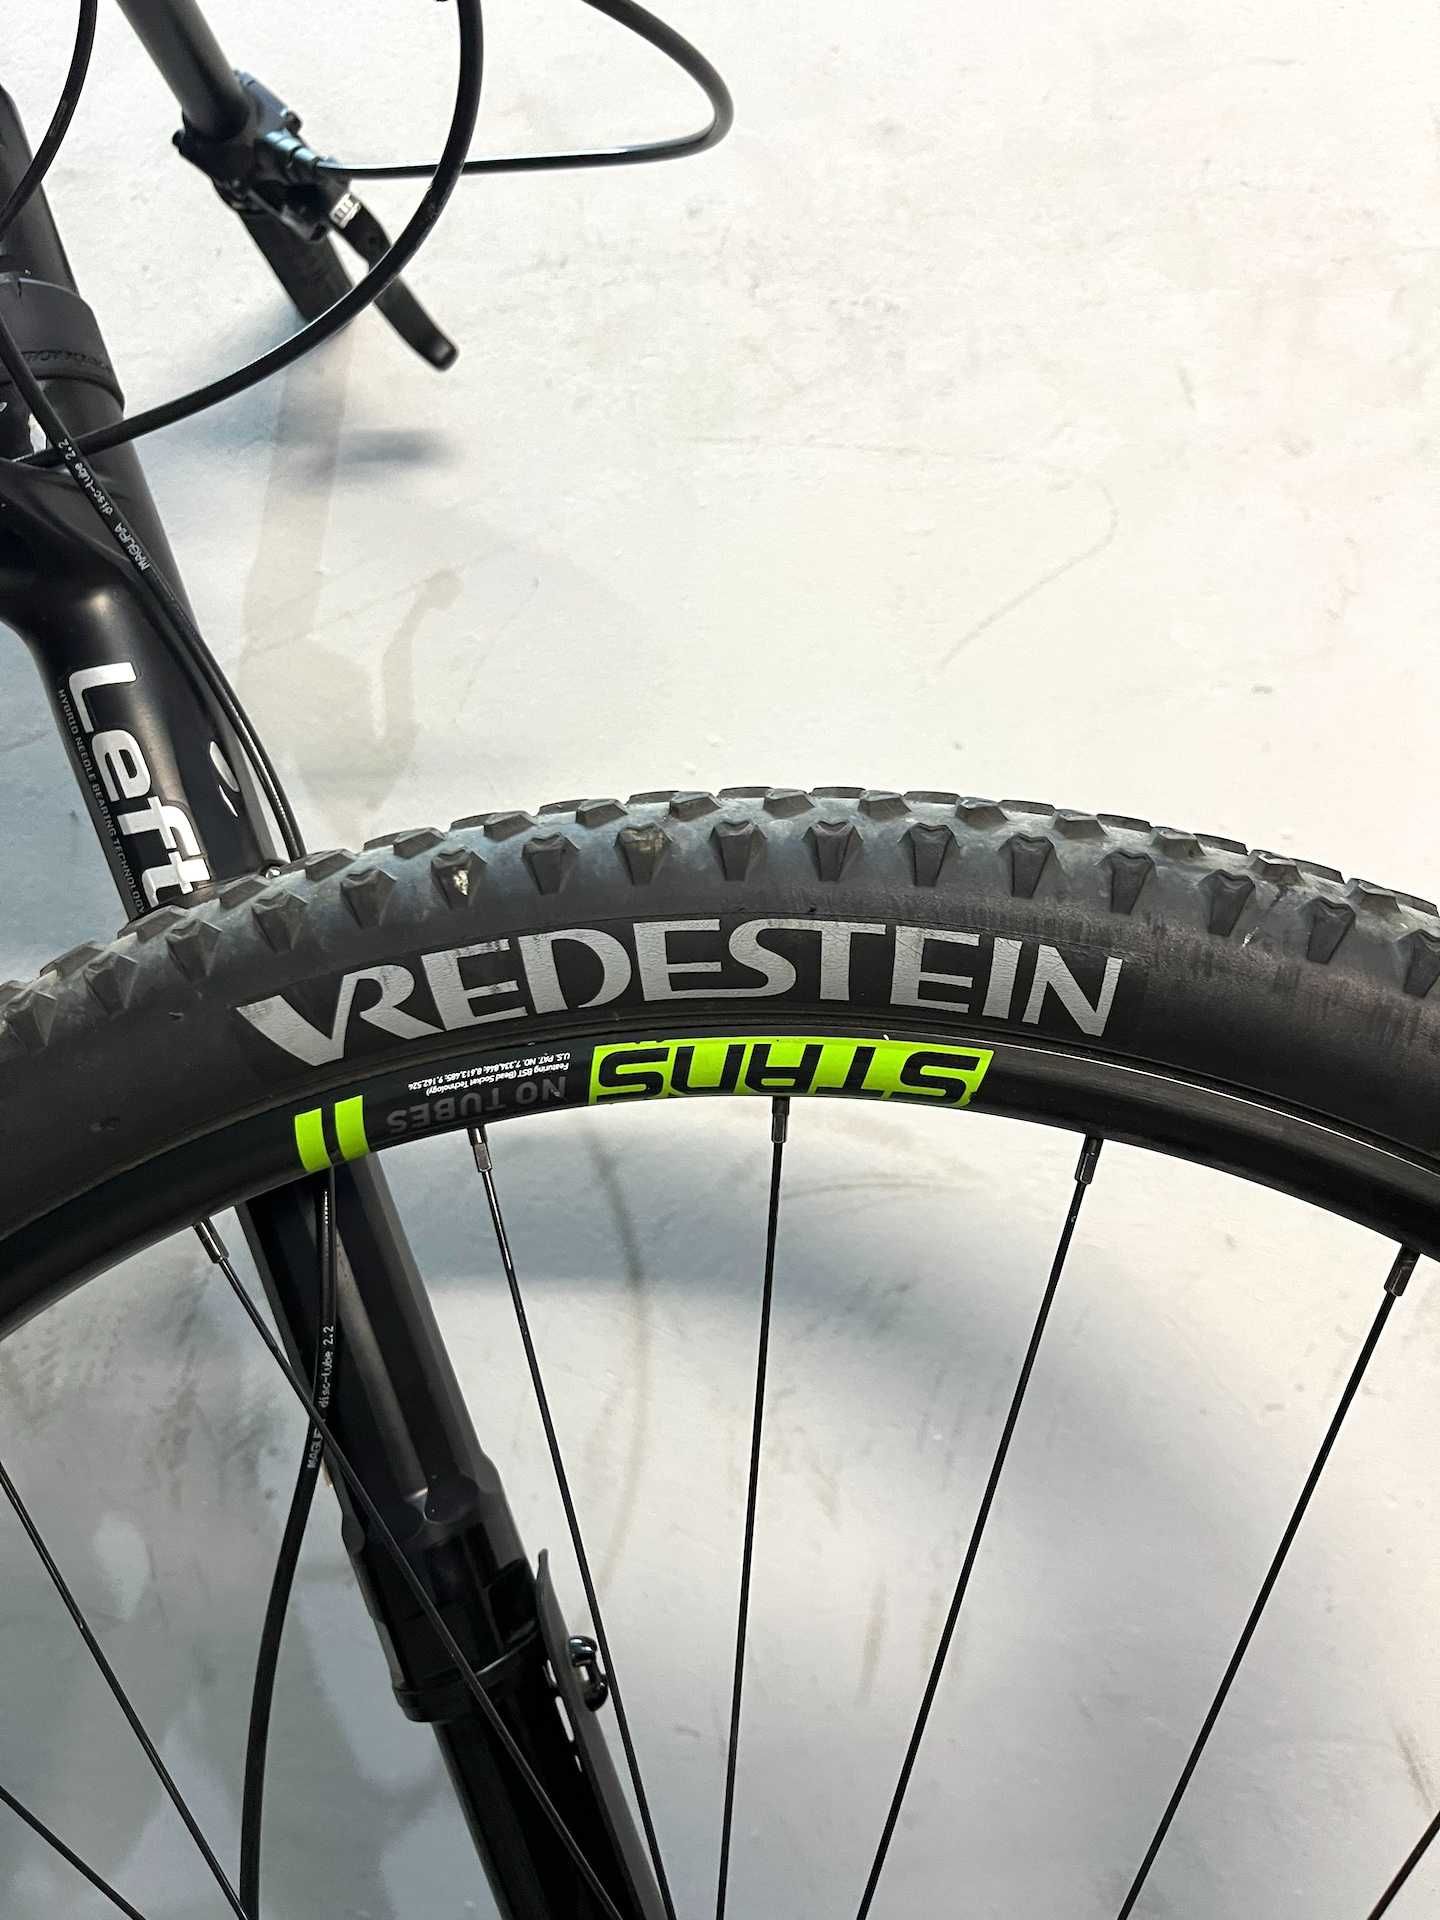 Cannondale F-Si Carbon 2 Lefty 2.0 29 1x11